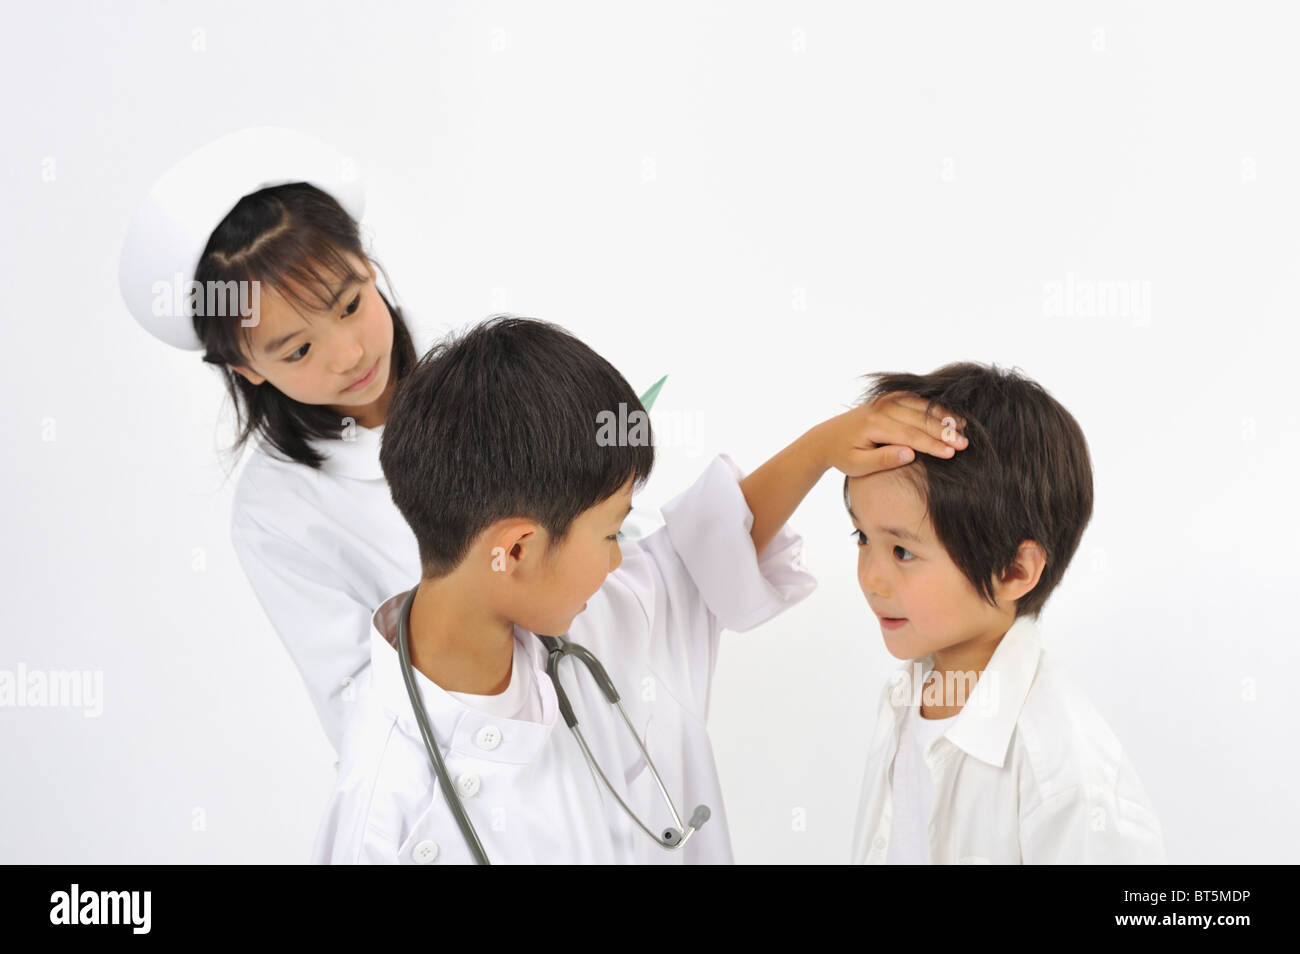 Children playing as doctor and nurse Stock Photo